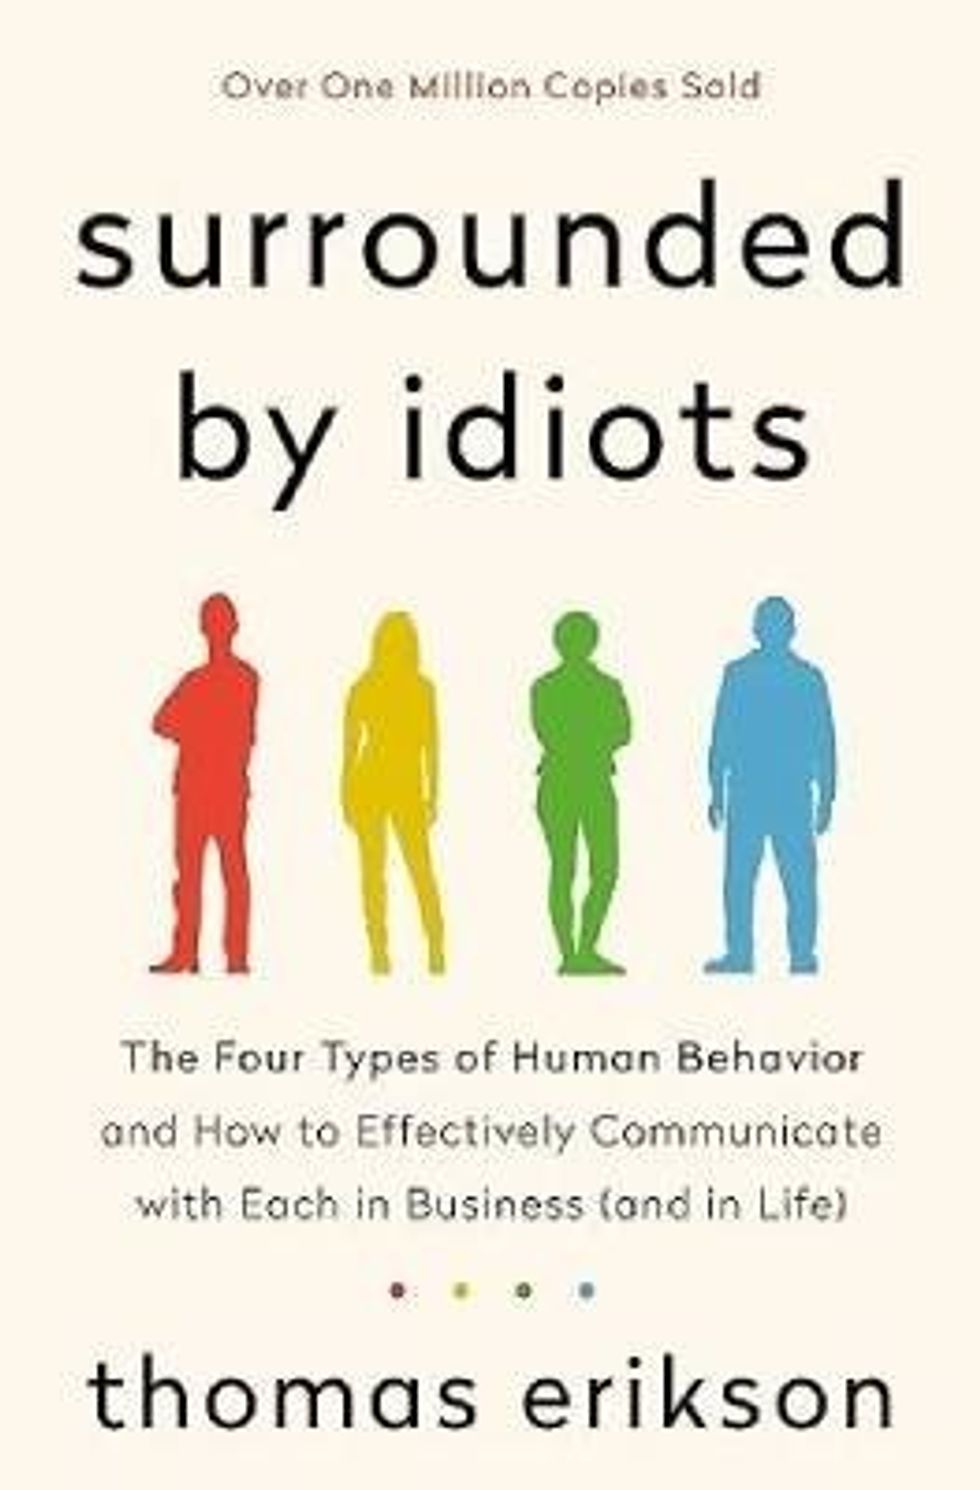 The front cover of the book "Surrounded by Idiots: The Four Types of Human Behavior and How to Effectively Communicate with Each in Business (and in Life)" by Thomas Erikson